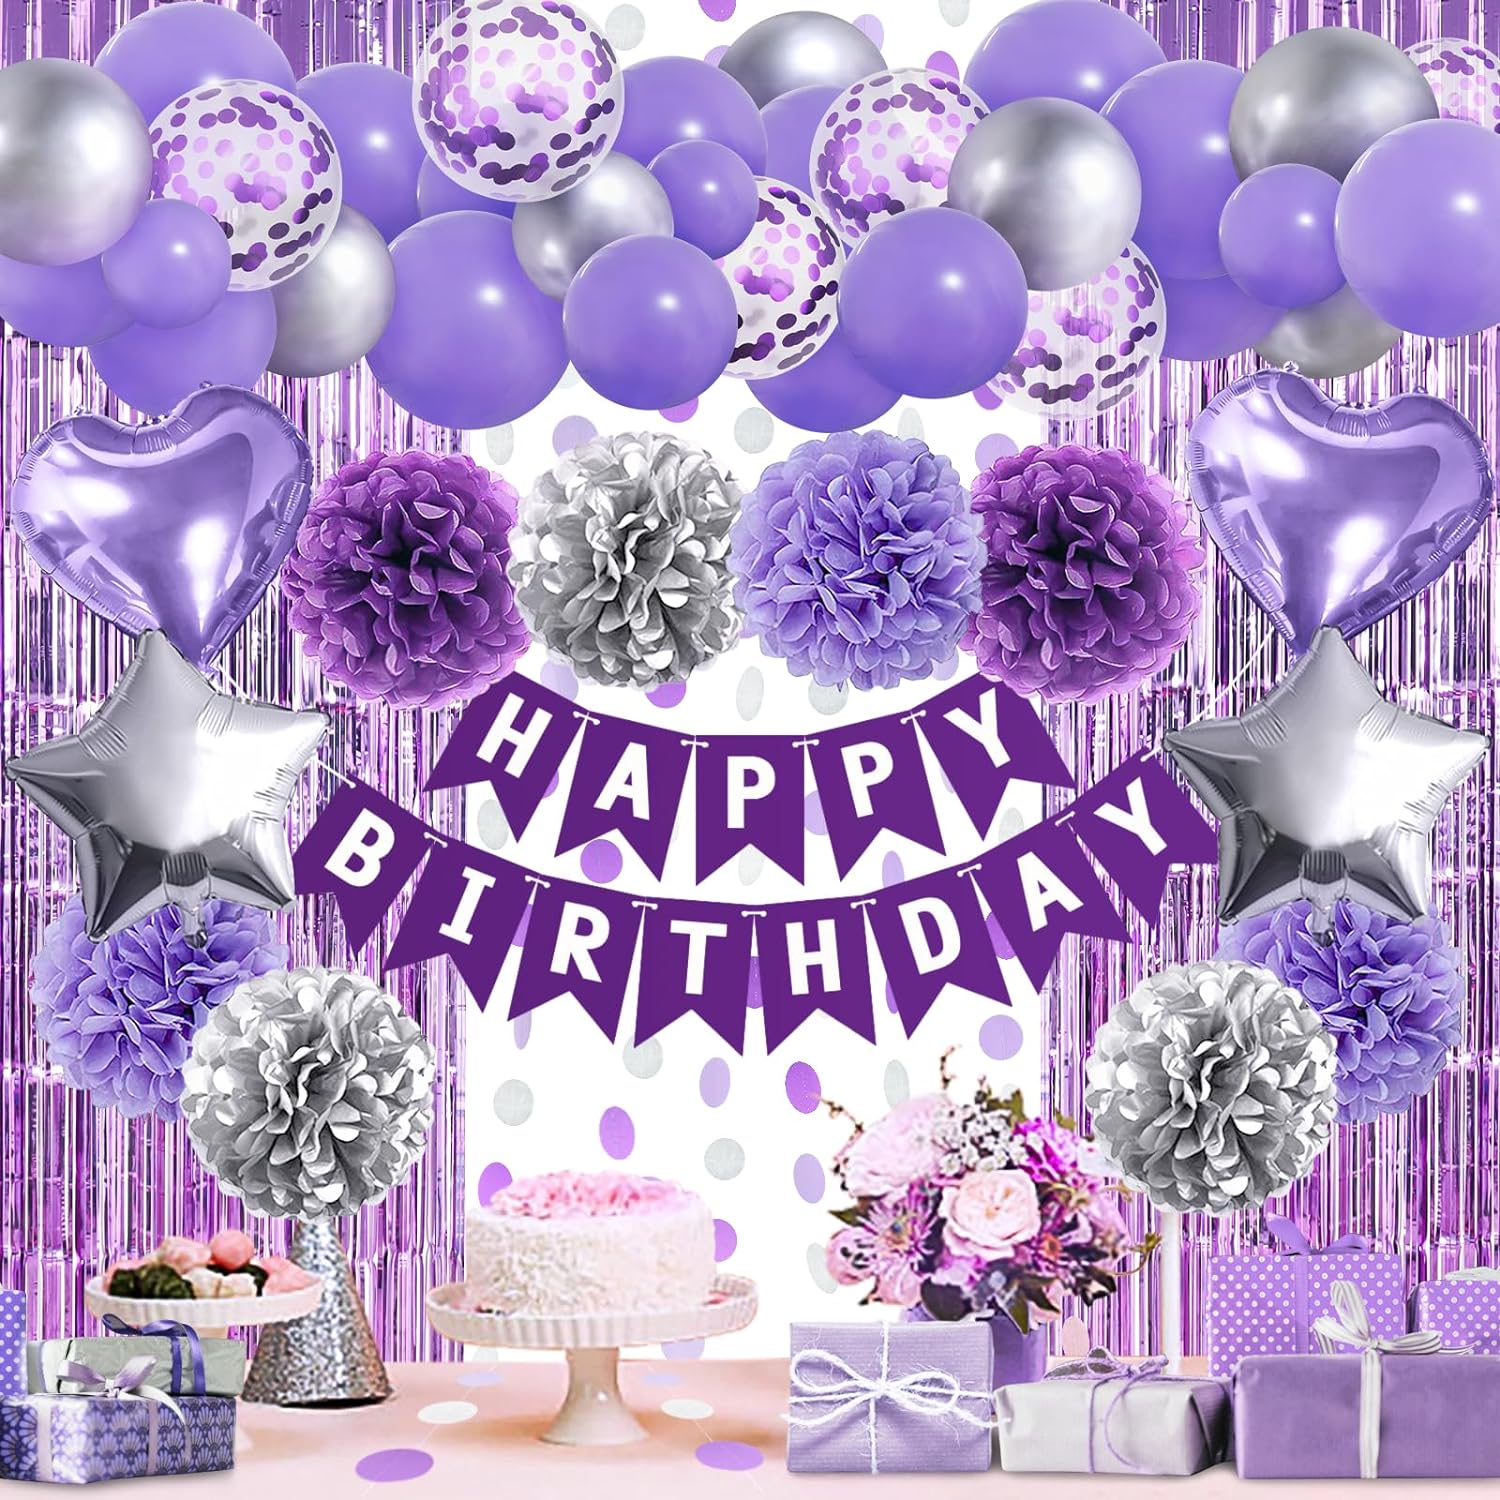 ZERODECO Purple Silver Birthday Party Decorations for Women Girls, Happy Birthday Banner Pompoms Balloon Arch Fringe Curtain Party Dcor for Baby Girls Women Purple Silver Birthday Party